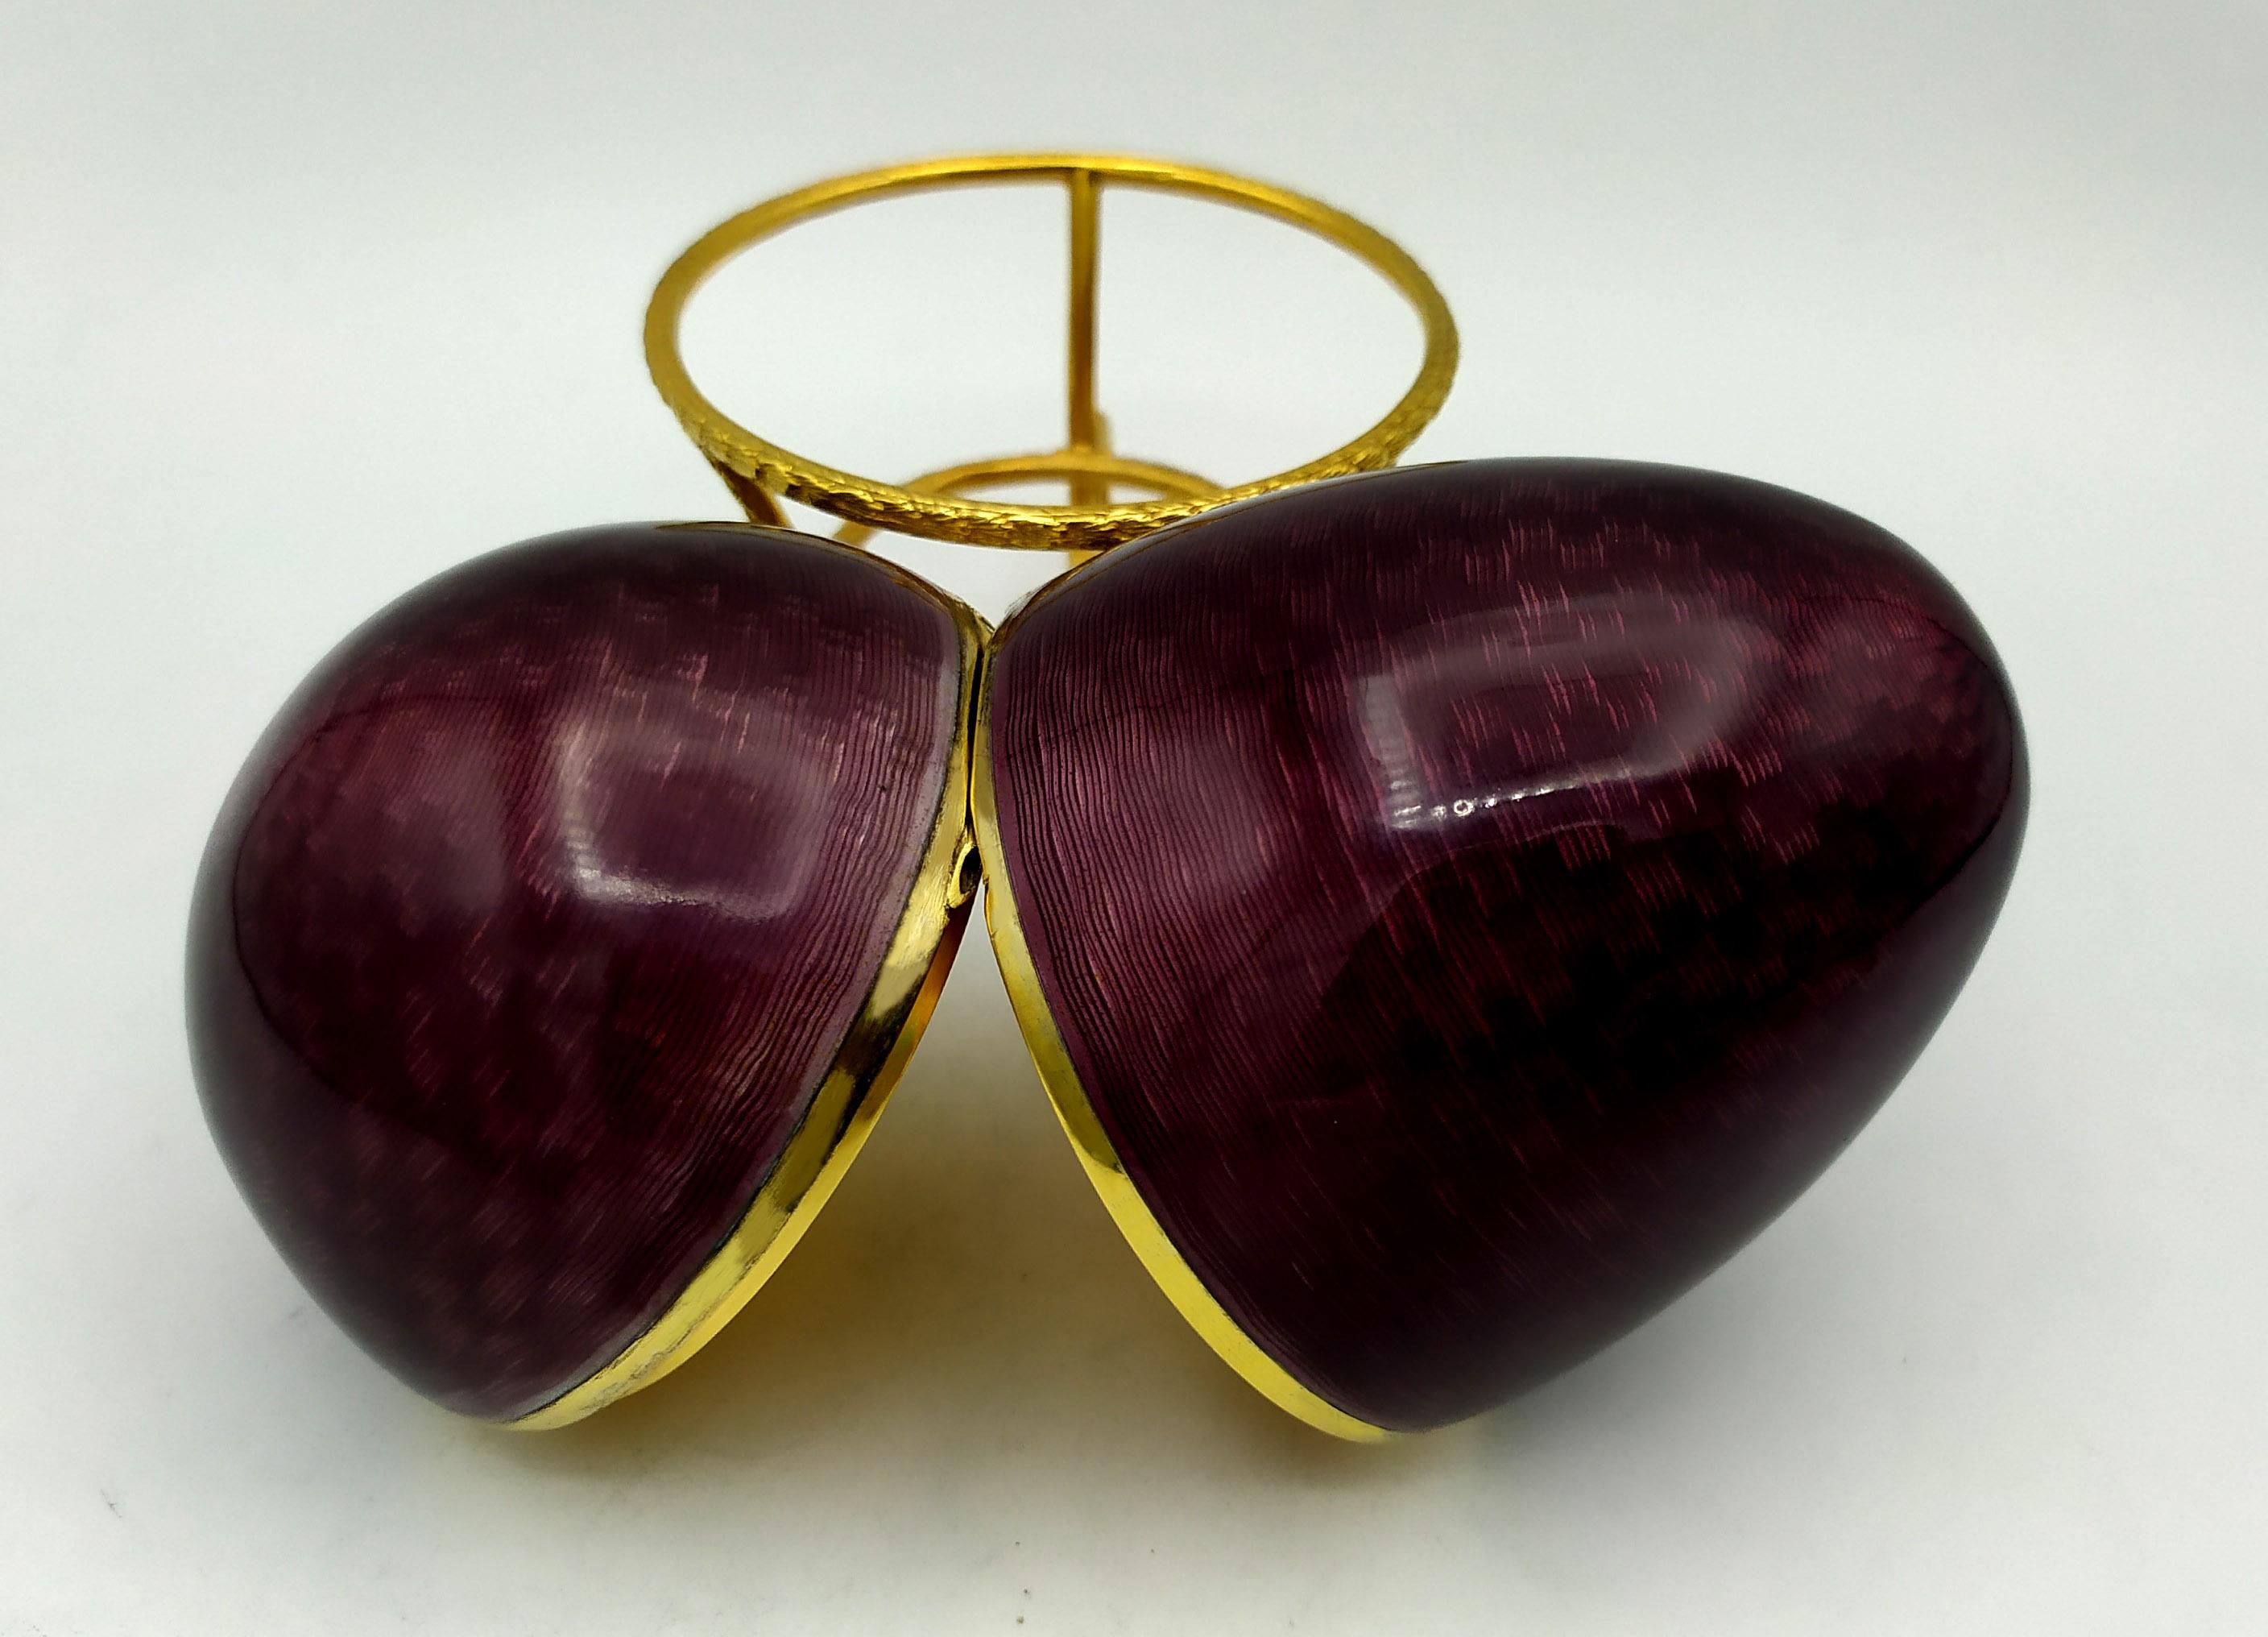 Plated Egg Plum enamel with tripod Sterling Silver Salimbeni For Sale